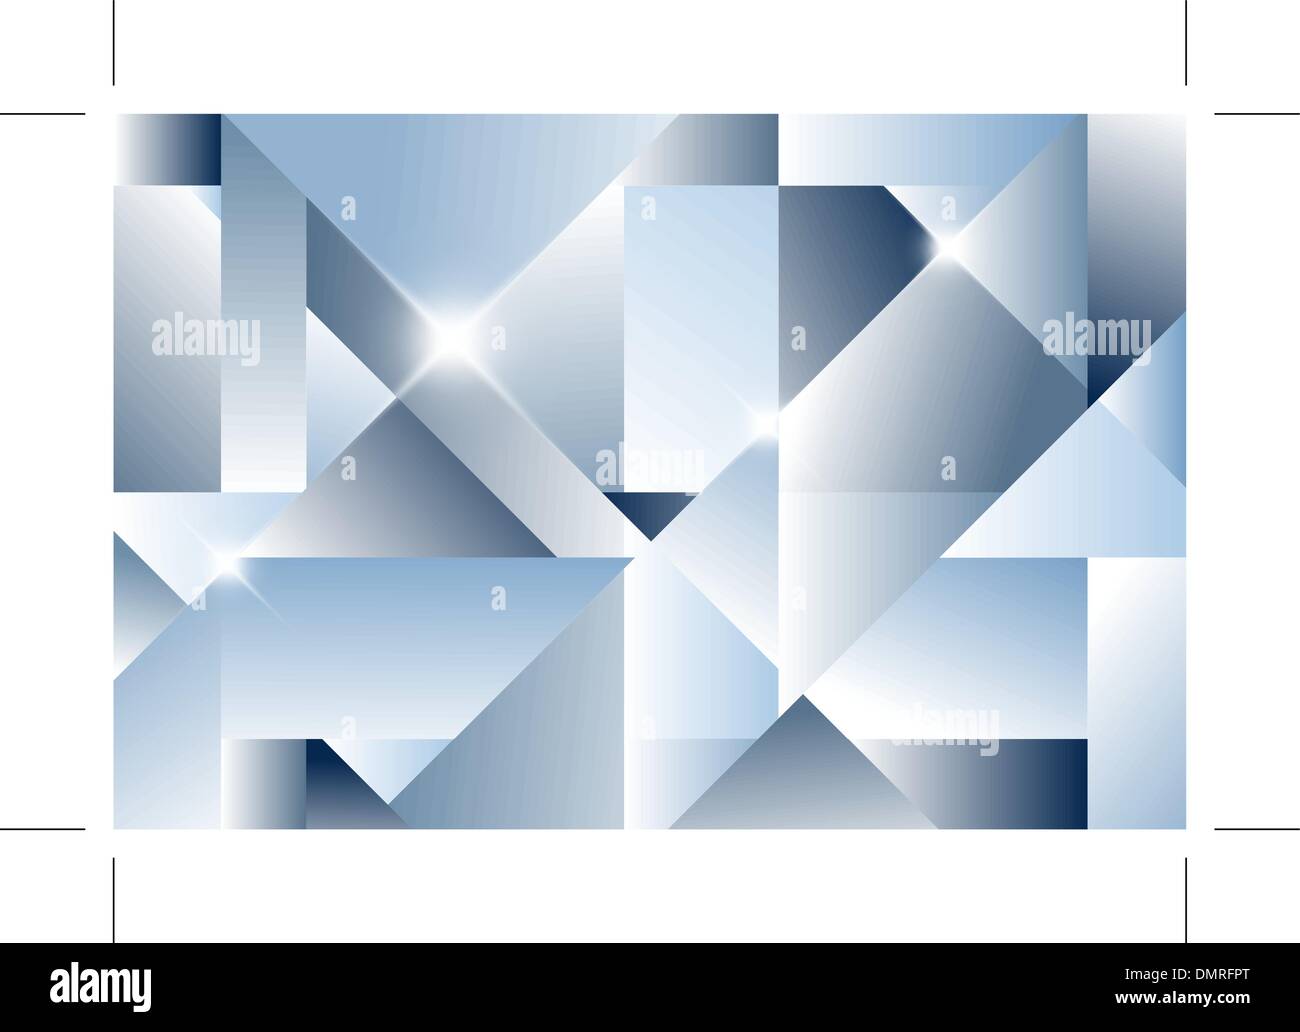 Cubism abstract background Stock Vector